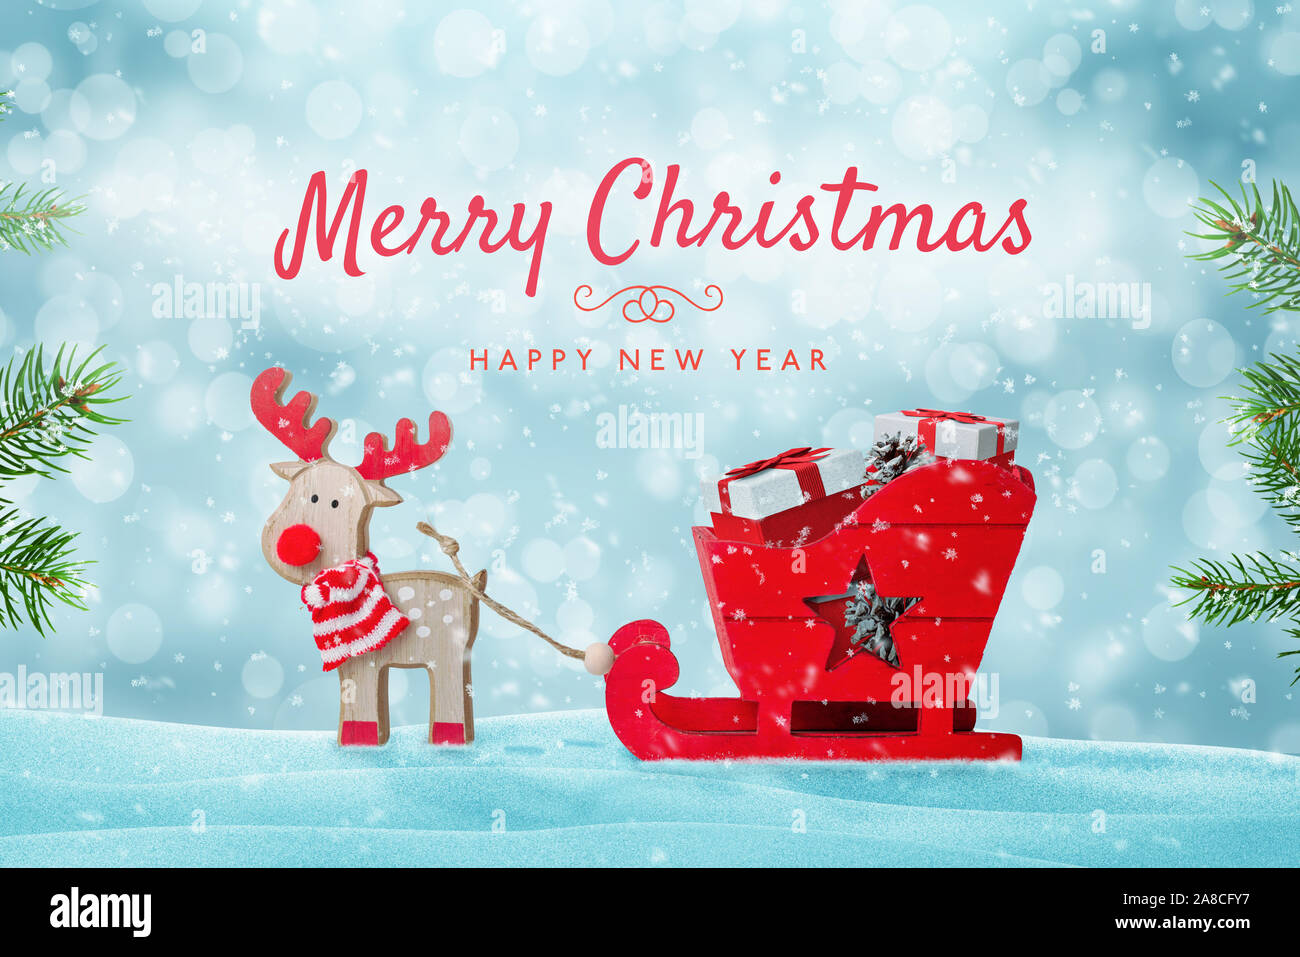 Merry Christmas greeting card with cute toy of Santa's reindeer sleigh full of gifts in snow. Stock Photo